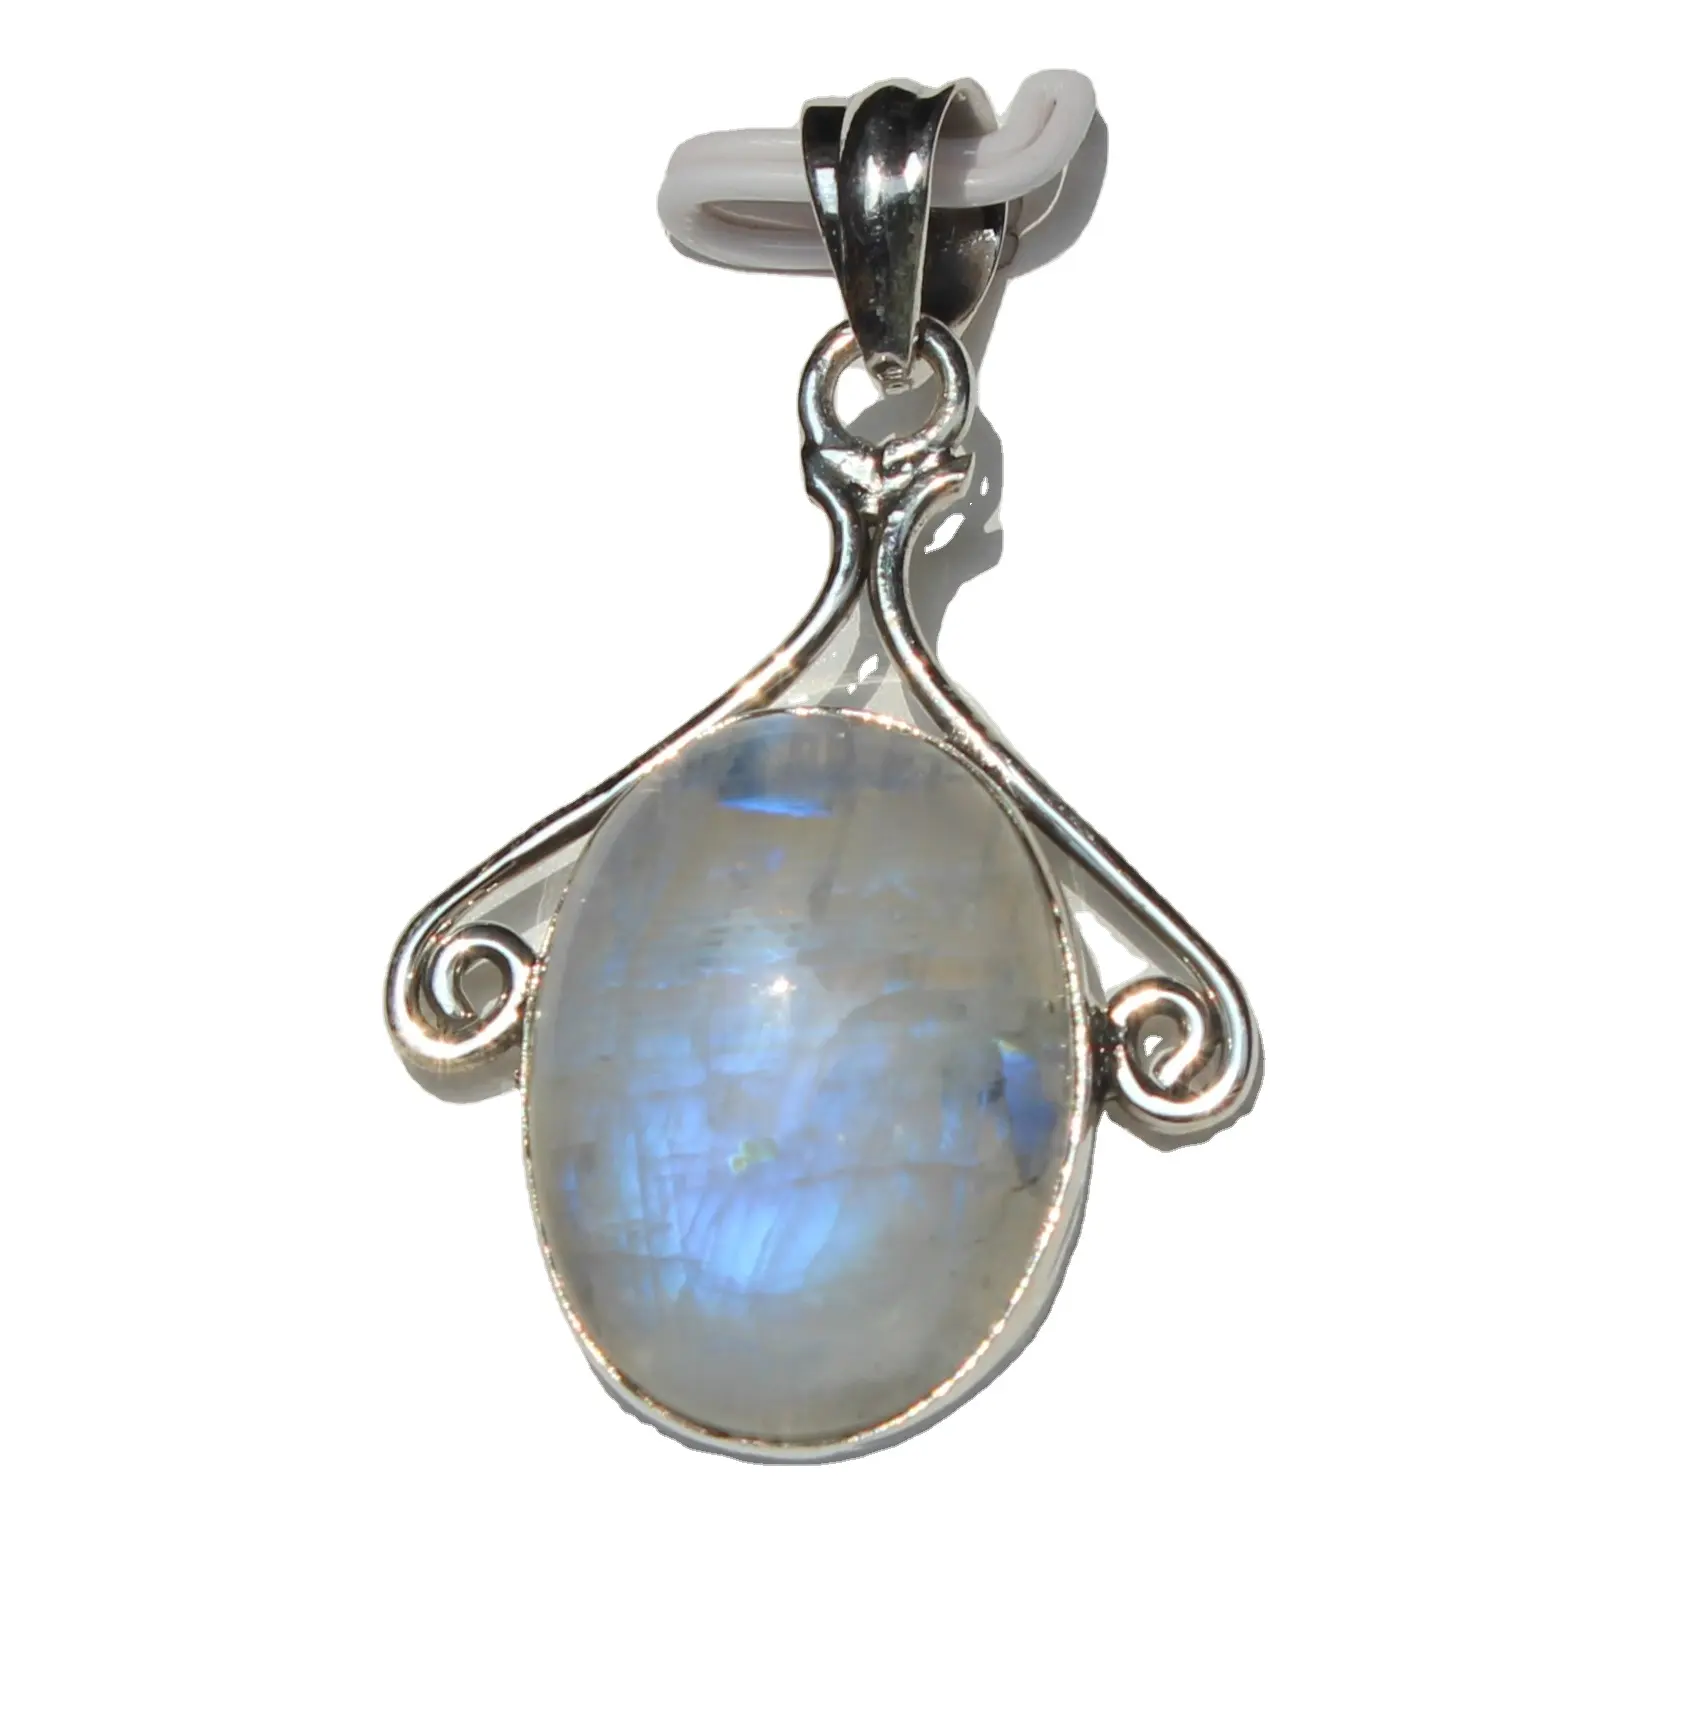 2023 Handcrafted Men's Jewelry Natural Rainbow Moonstone Oval Pendant with 925 Sterling Silver Bezel Setting and Drop Cabochon